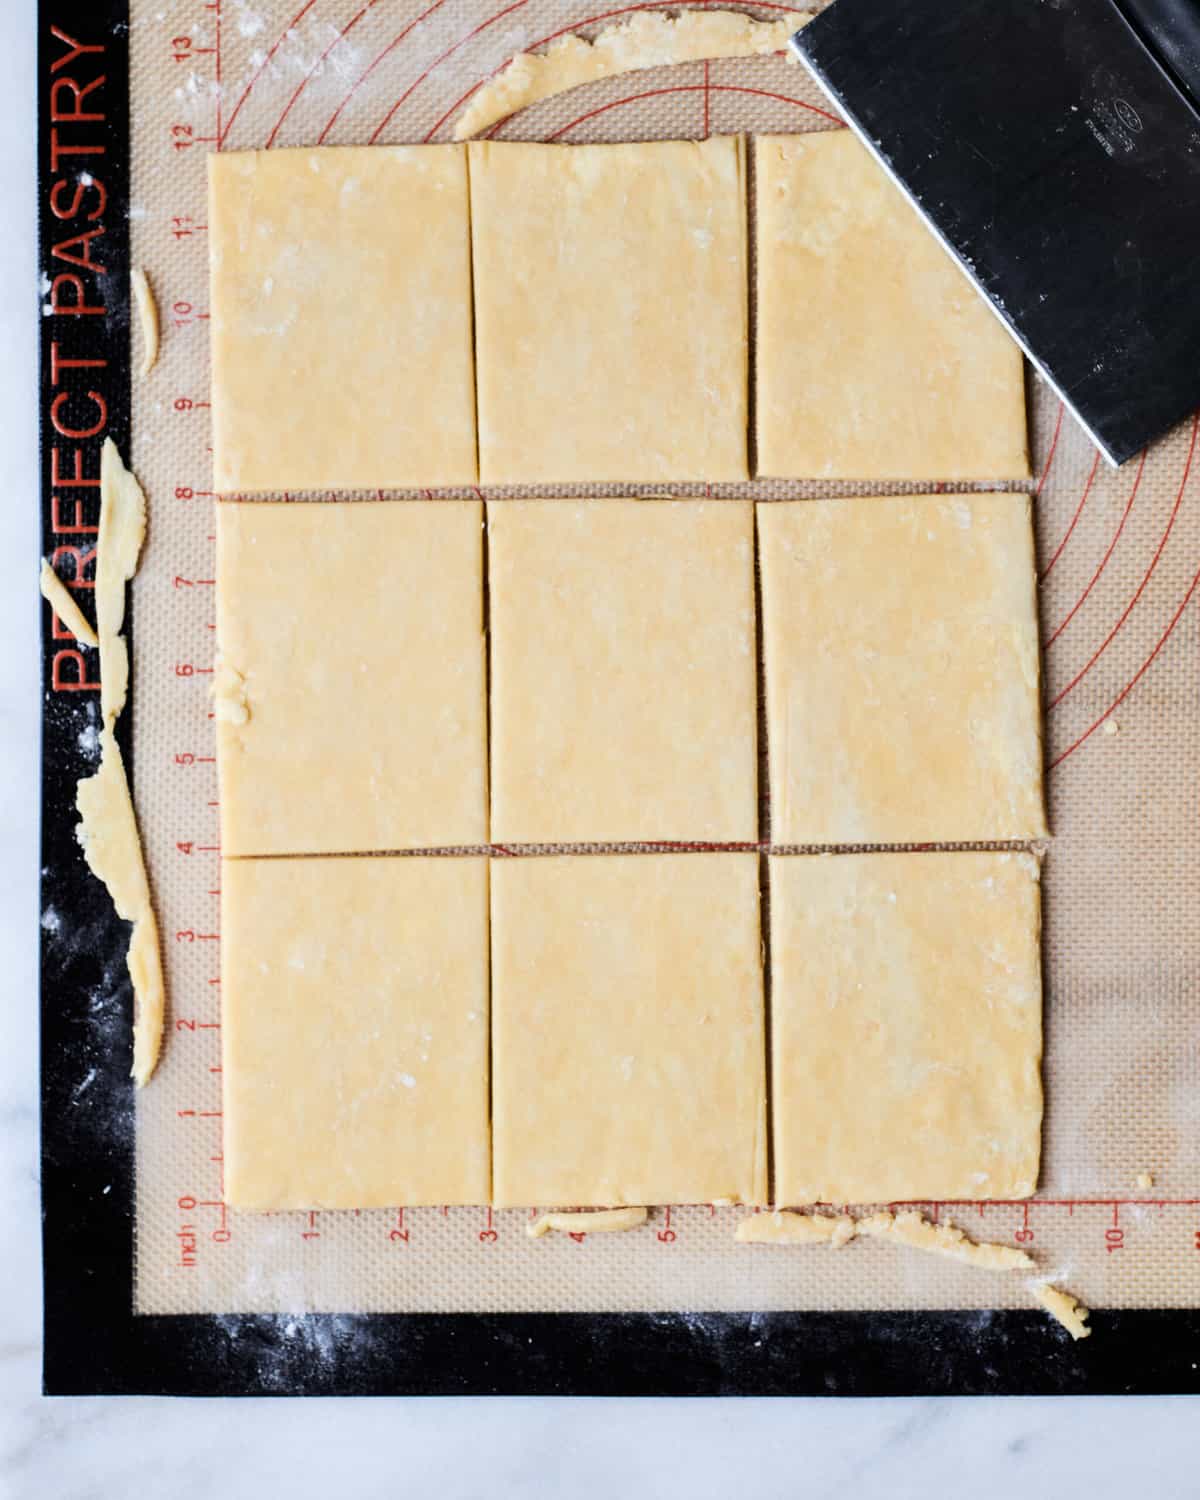 dough being cut into rectangles.